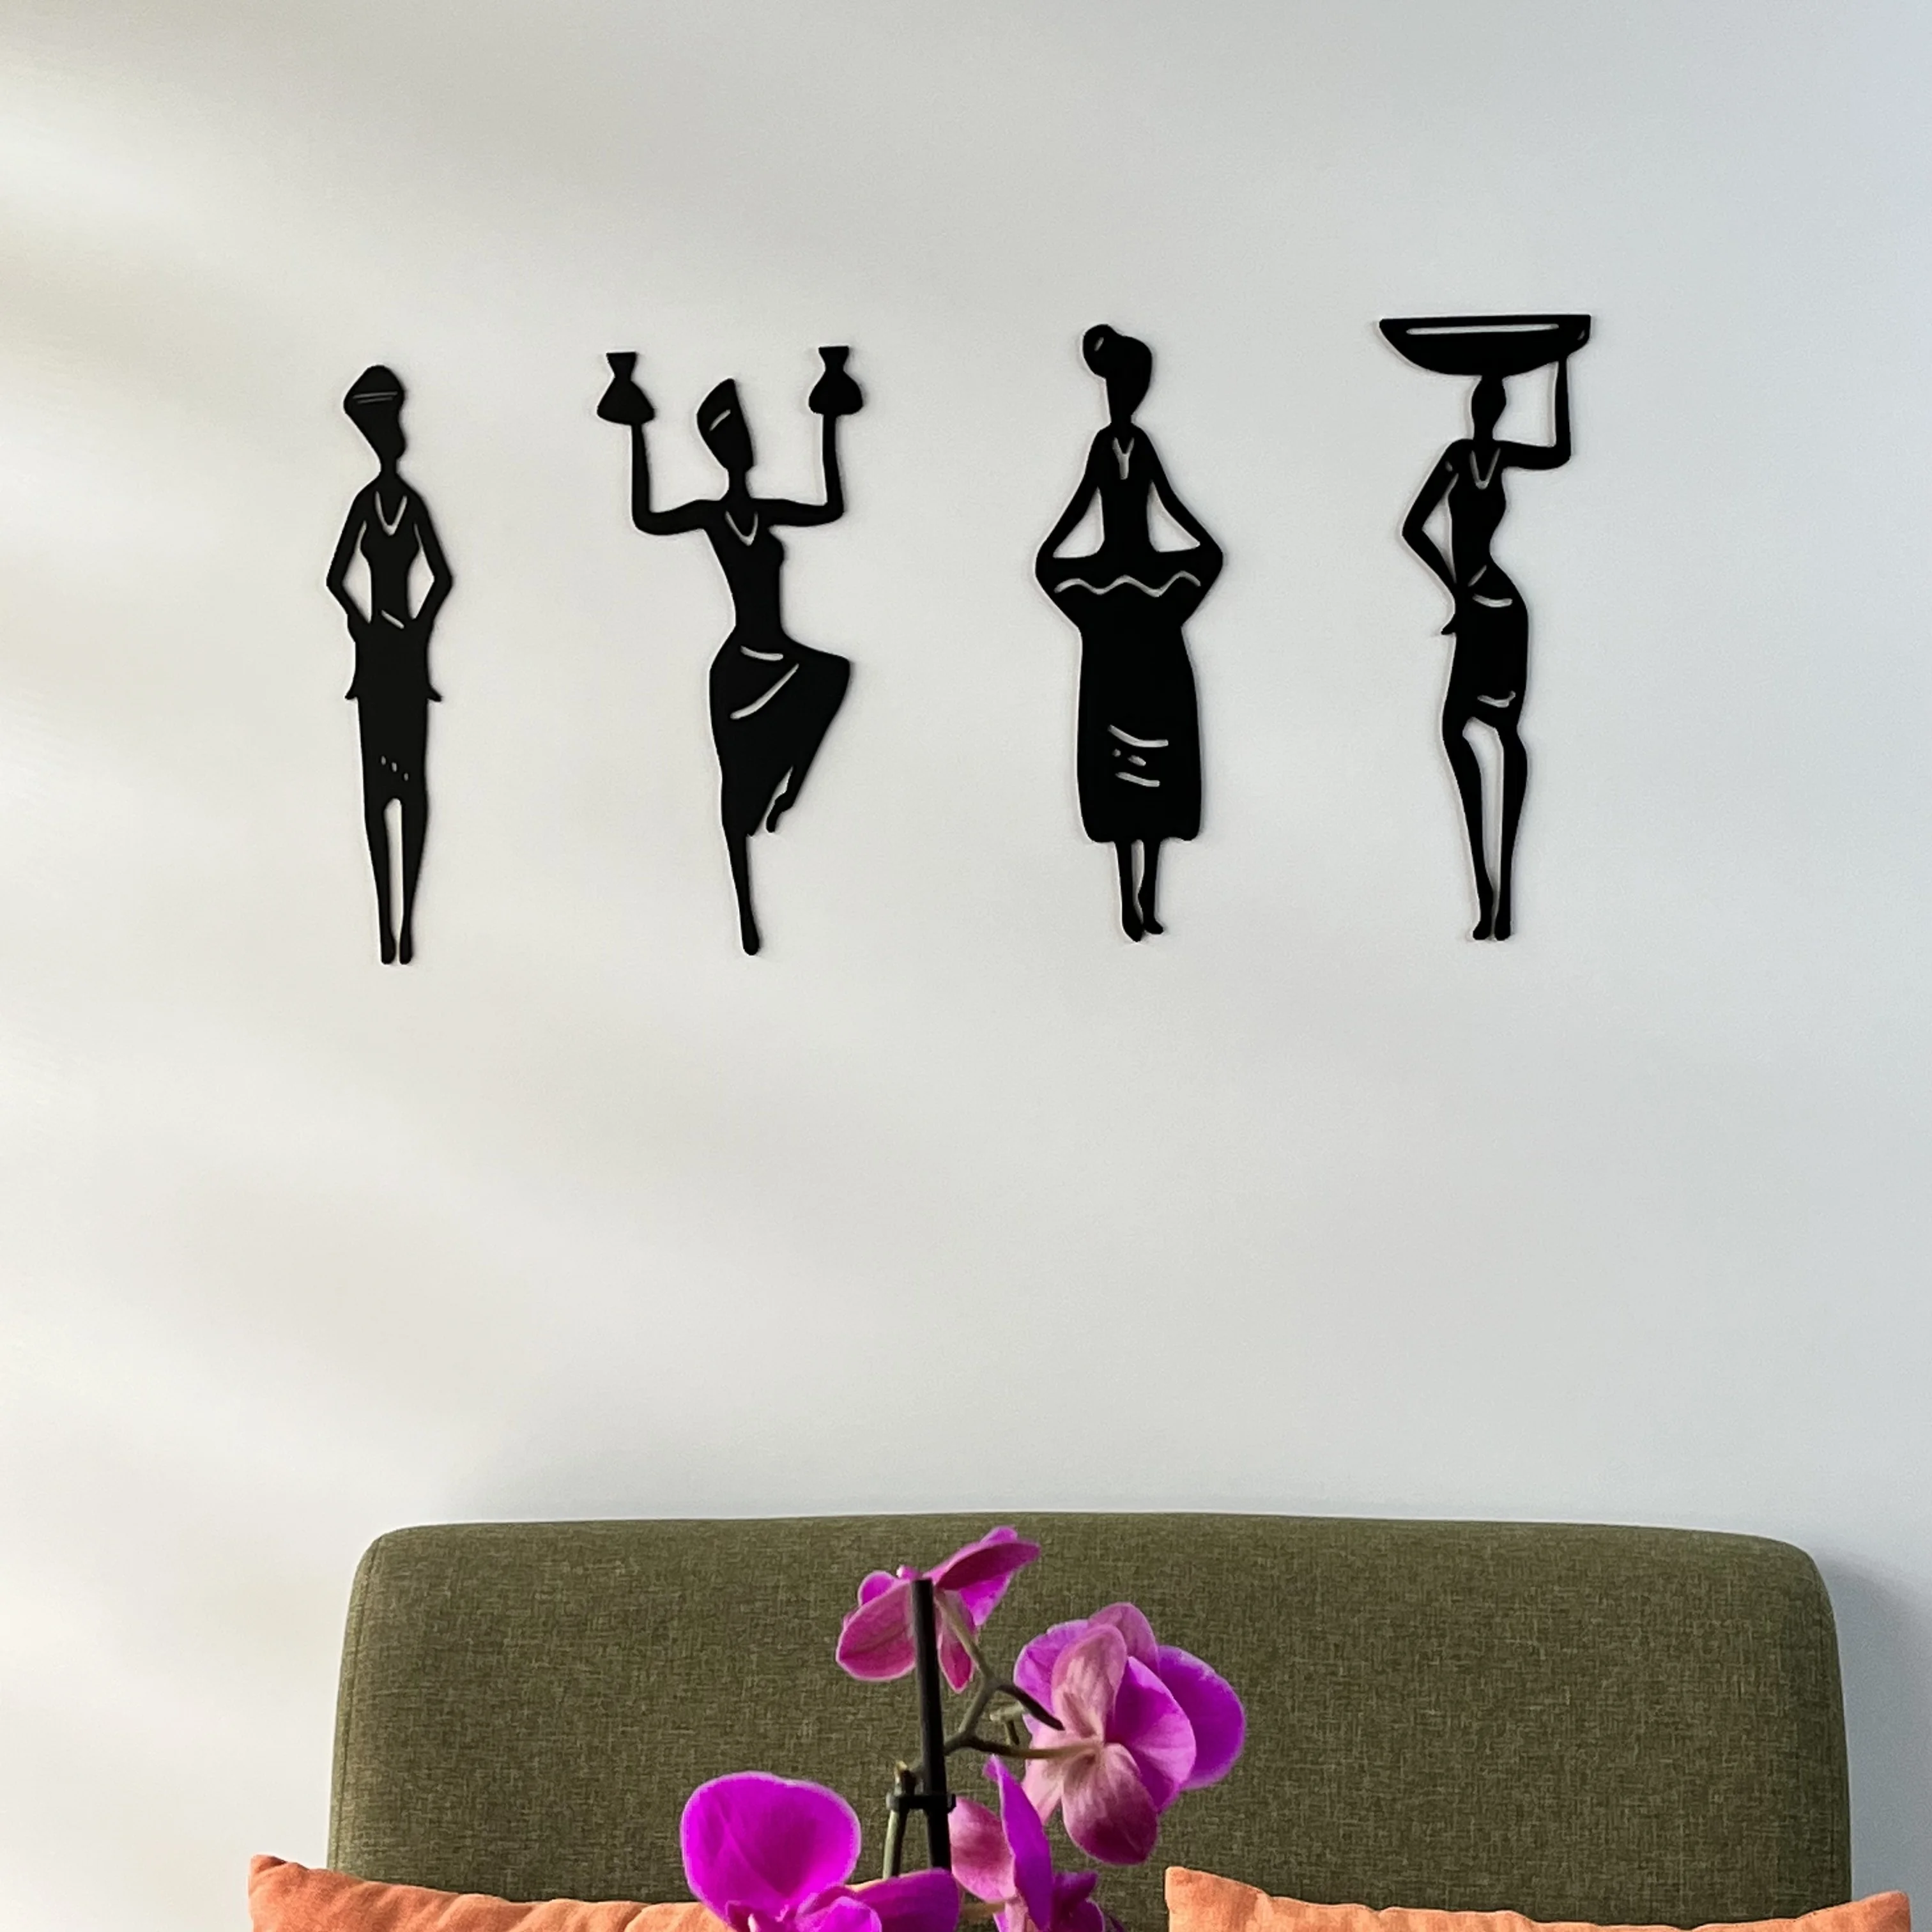 

Wooden Unframed African Women Wall Decor Quality Gift Ideas 3D MDF Black Modern Home Office Living Room Bedroom Kitchen Art Decoration Nordic Style New Charming Stylish Decorative Ornament Beautiful Souvenir Creative